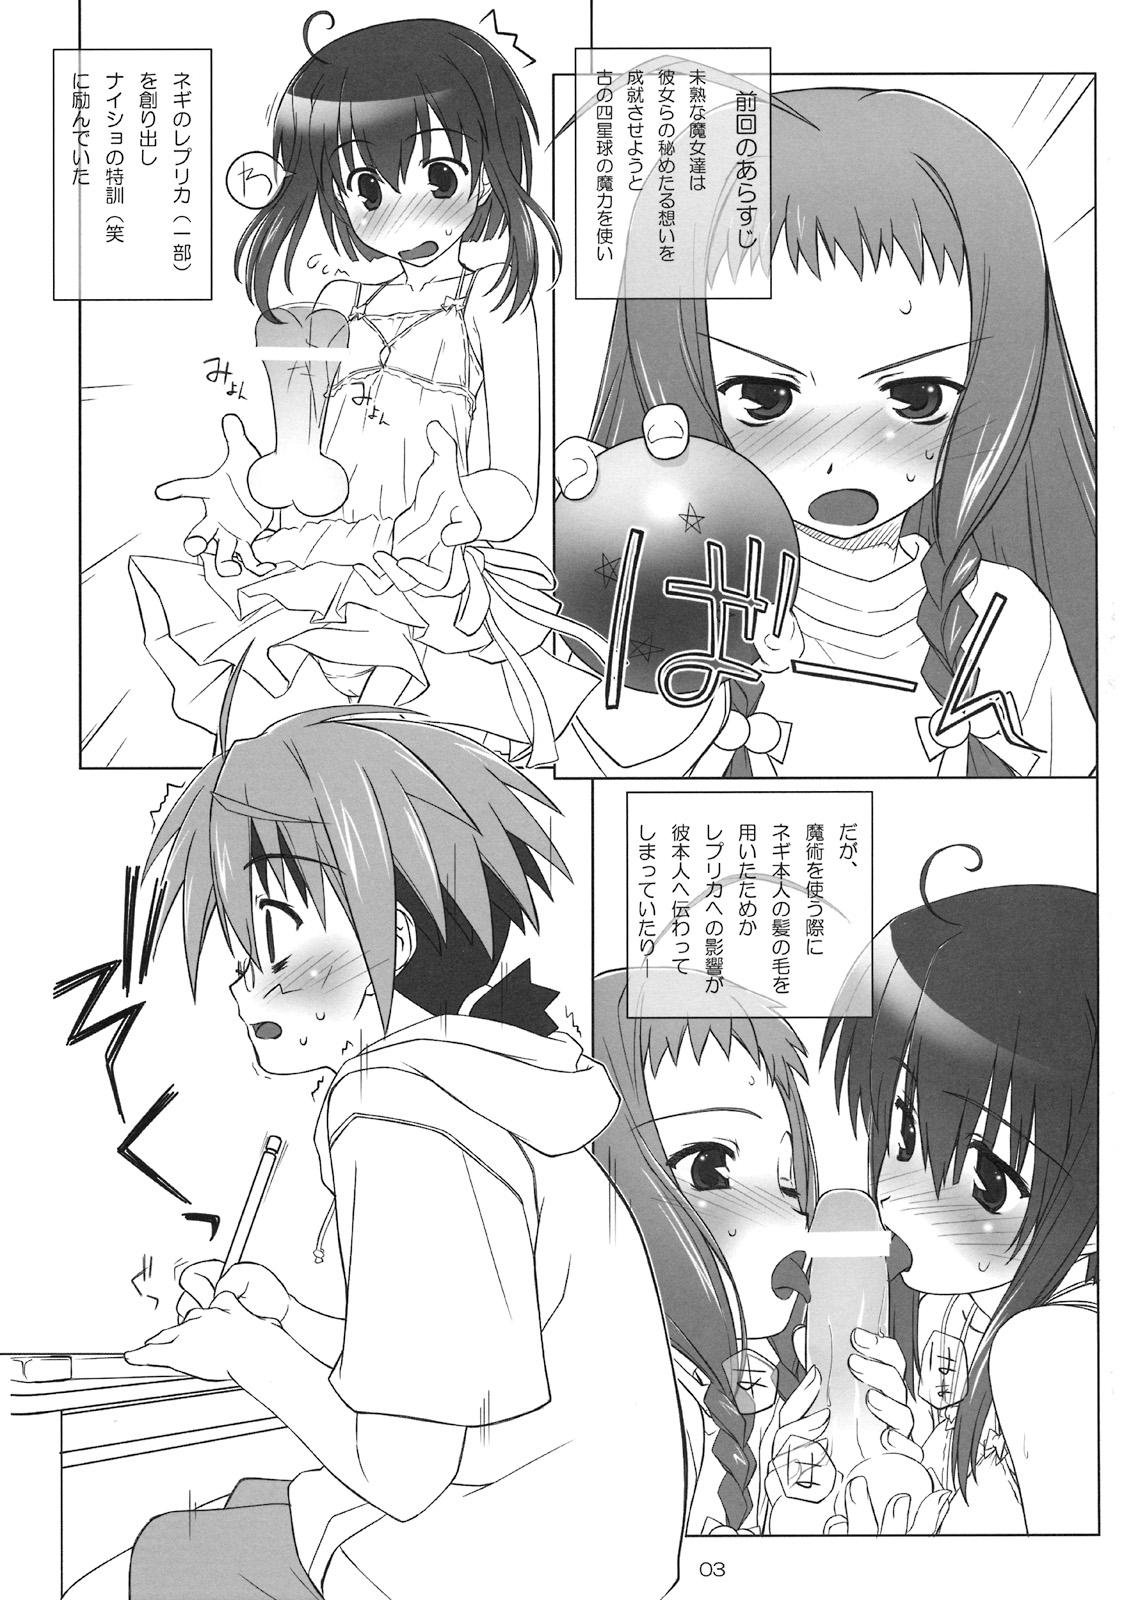 Stepfather Dear My Little Witches 2nd - Mahou sensei negima Gay Bukkakeboy - Page 2